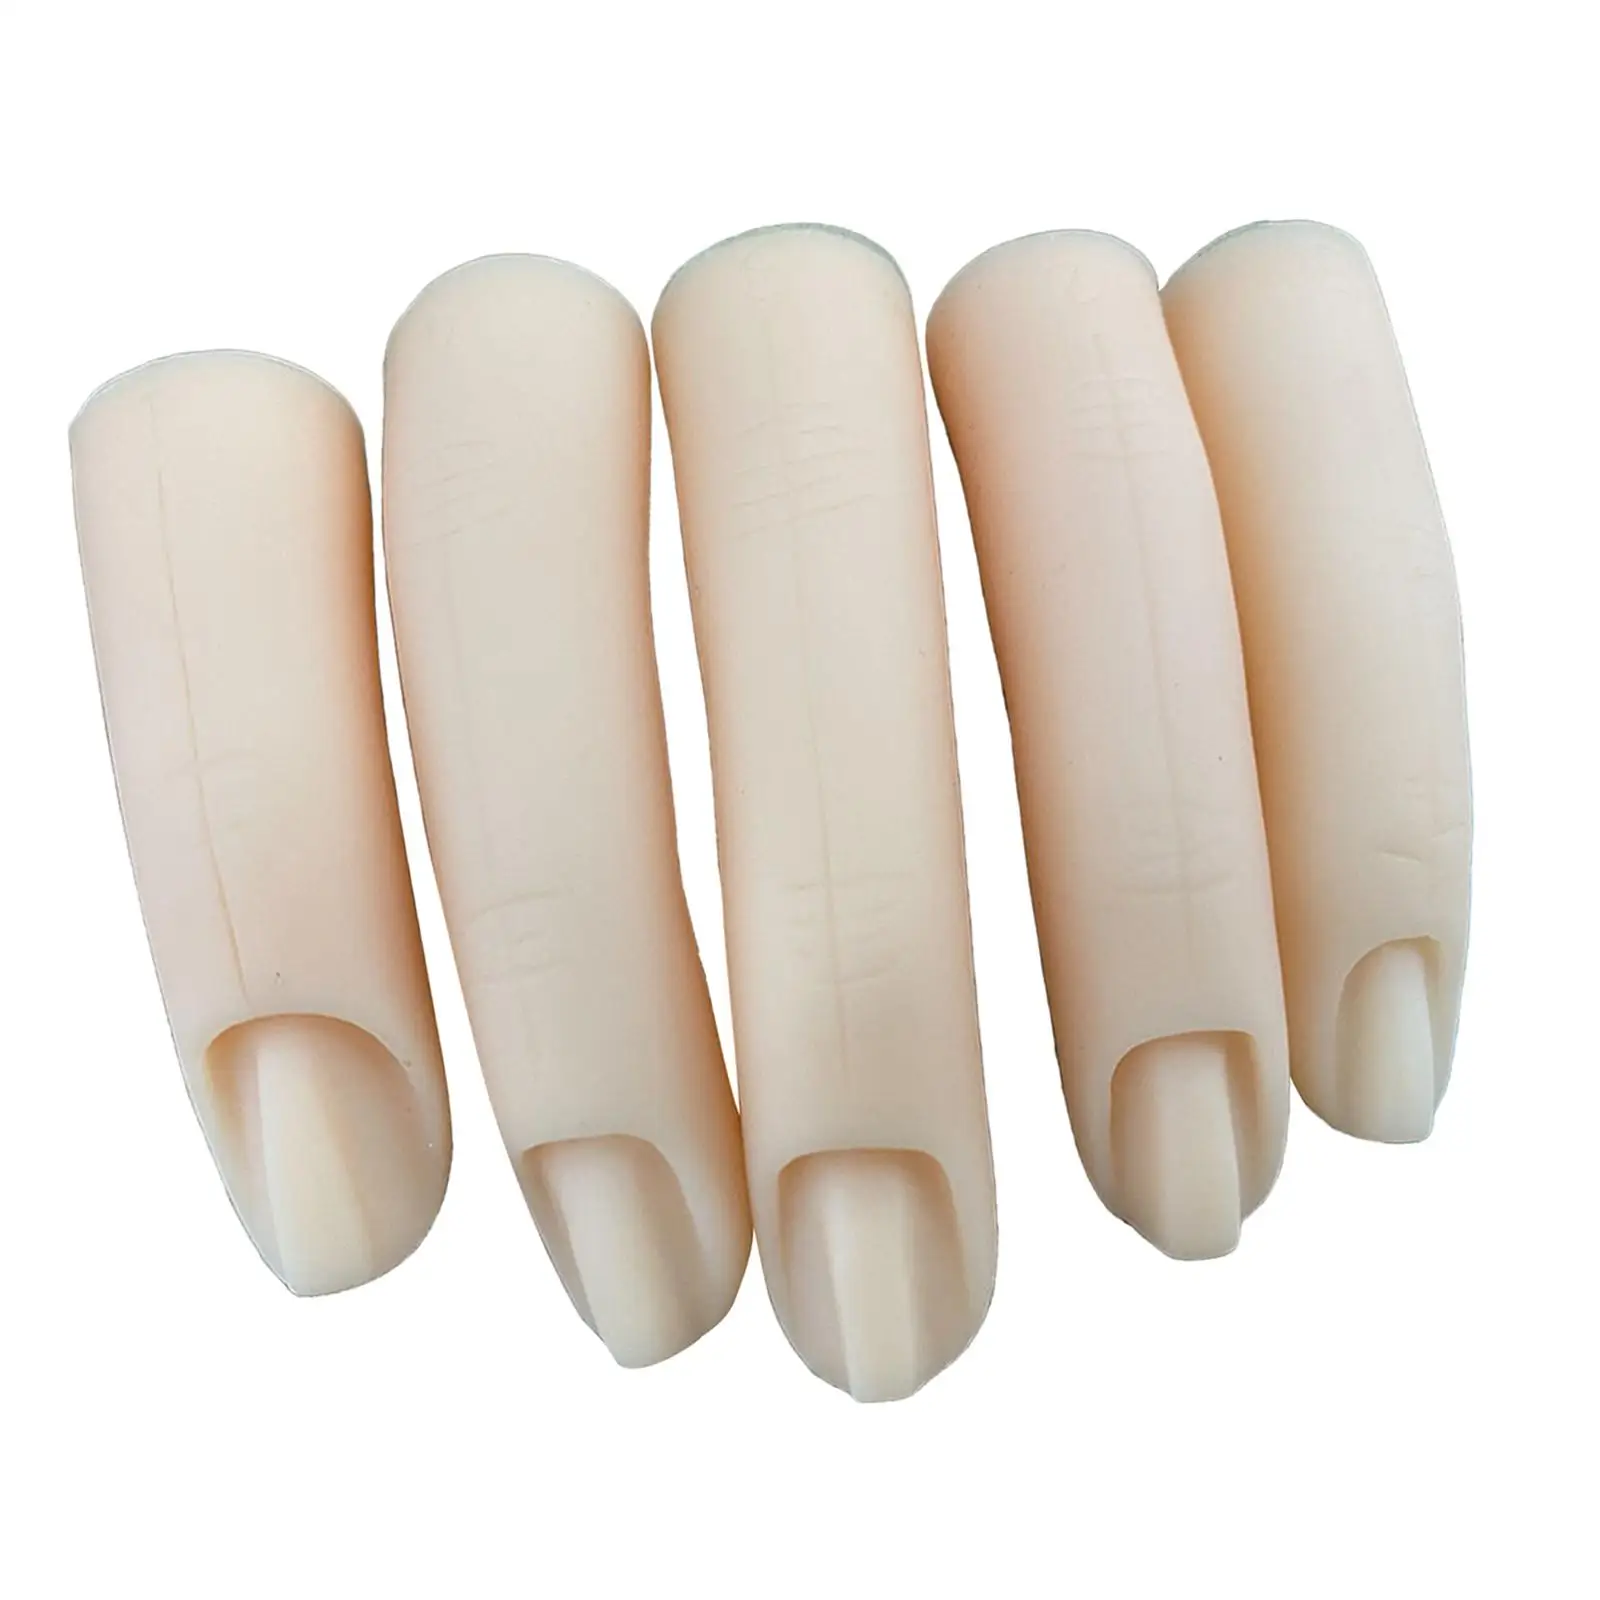 5x Silicone Practice Finger Training Display Tools Soft Mannequin Hands Reusable Nail Pratice Training Finger for Acrylic Nails